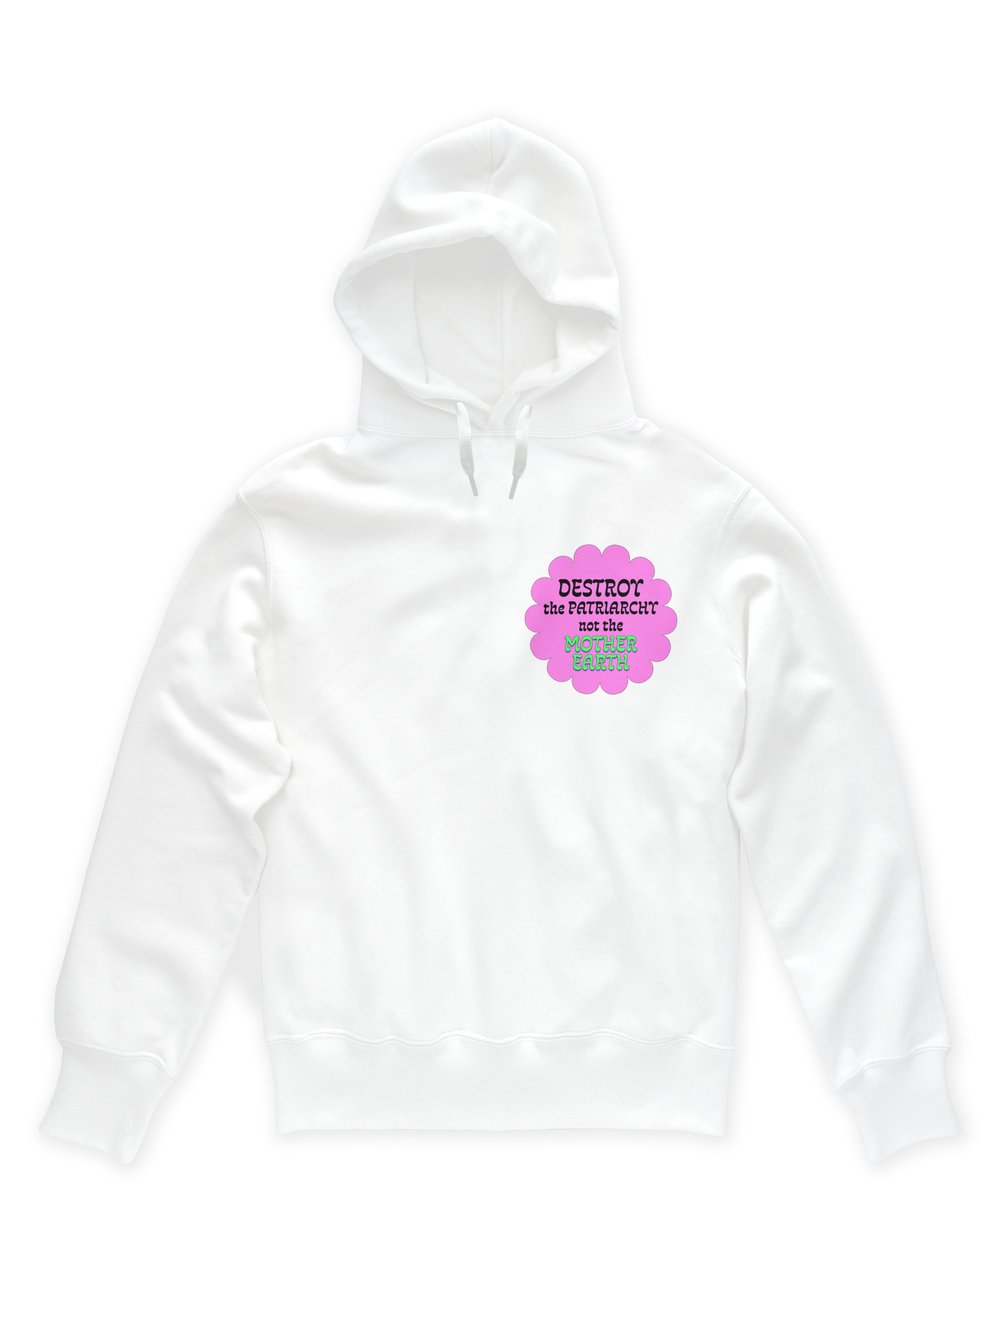 Destroy Patriarchy Not The Mother Earth Hoodie